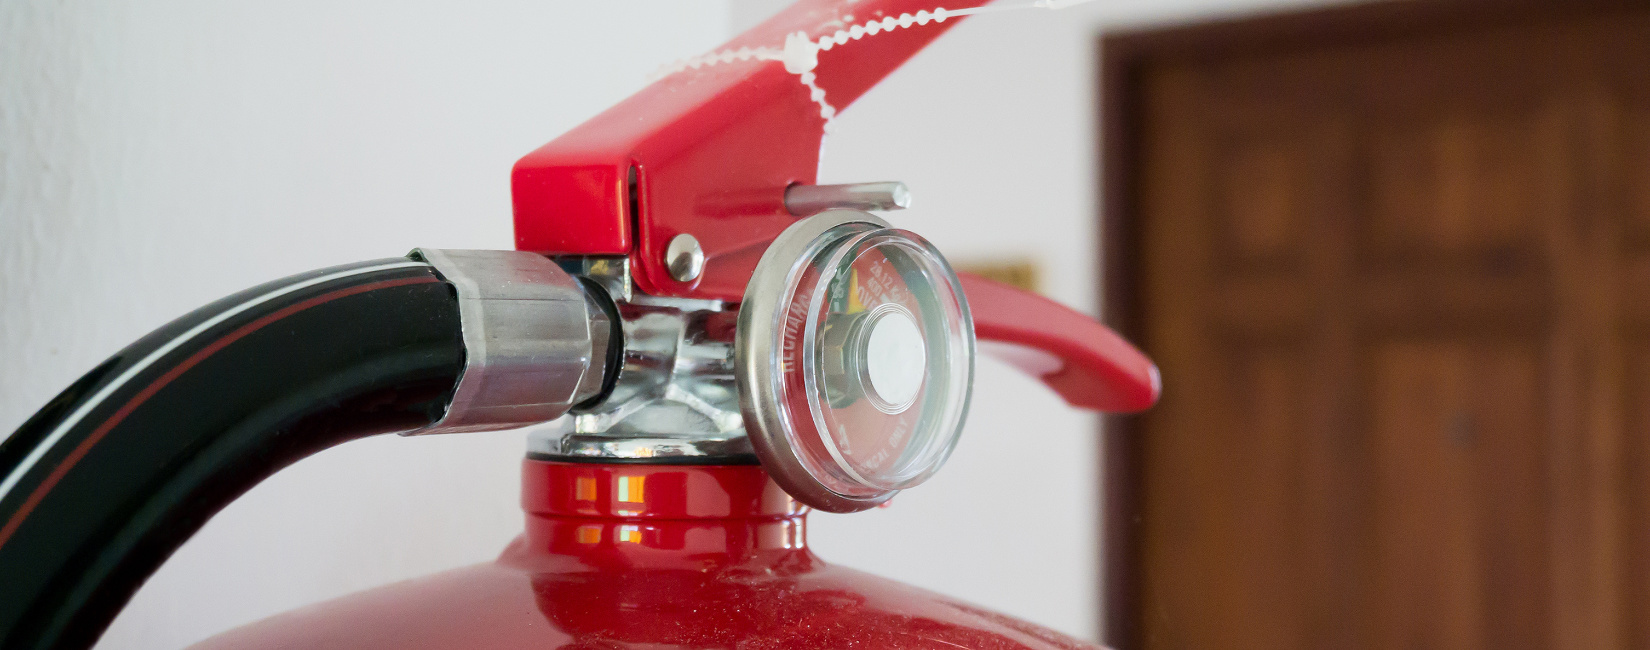 Fire extinguisher training via e-learning suitable for office staff